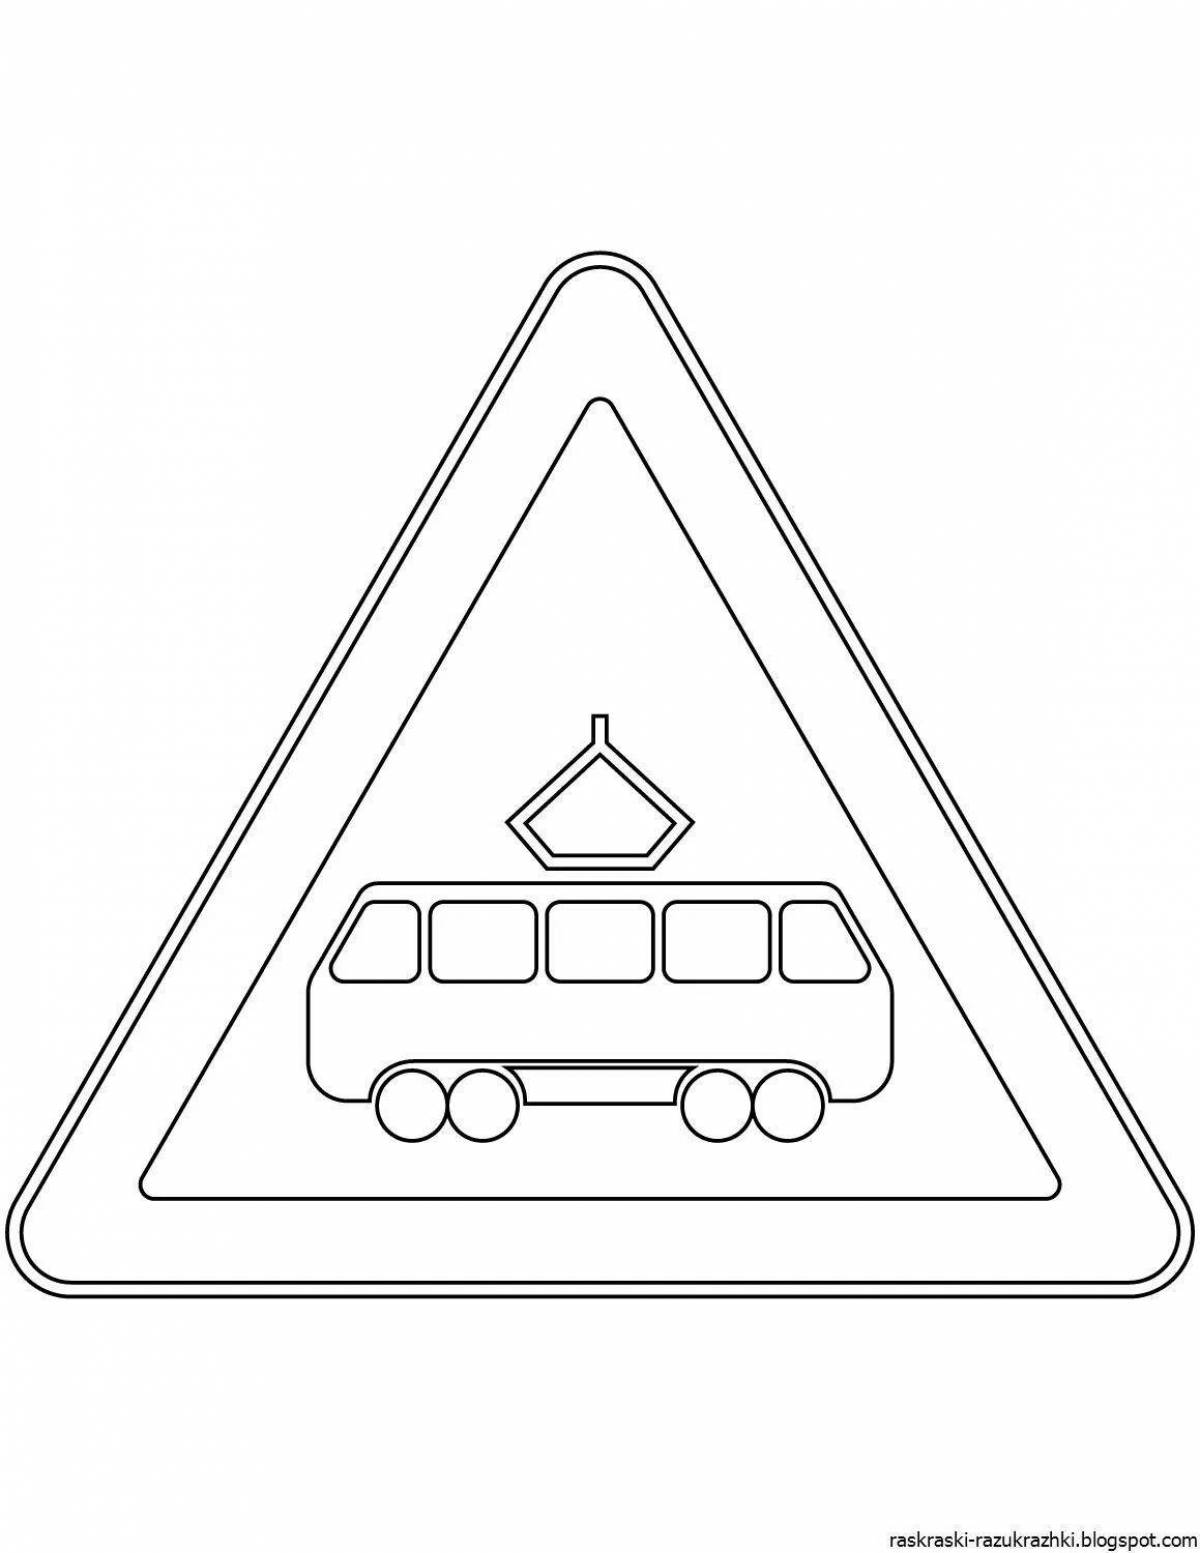 Attractive road sign coloring page